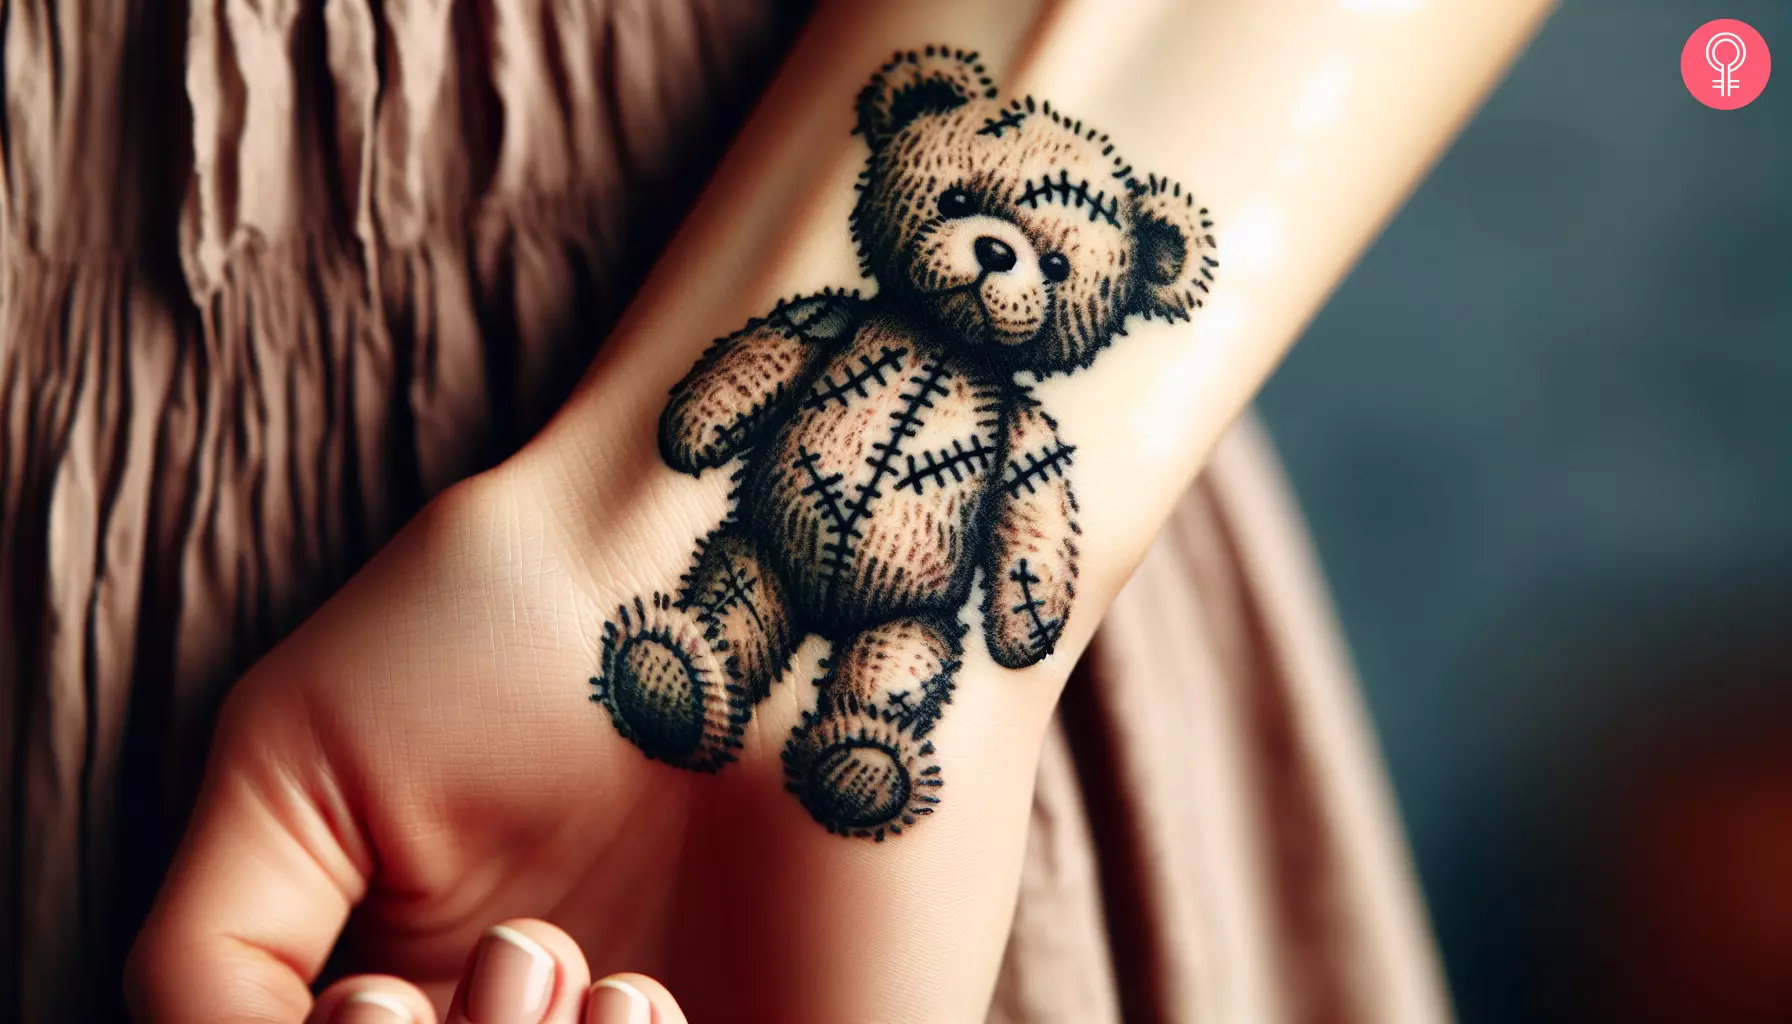 Woman with a battered teddy bear tattoo on her wrist